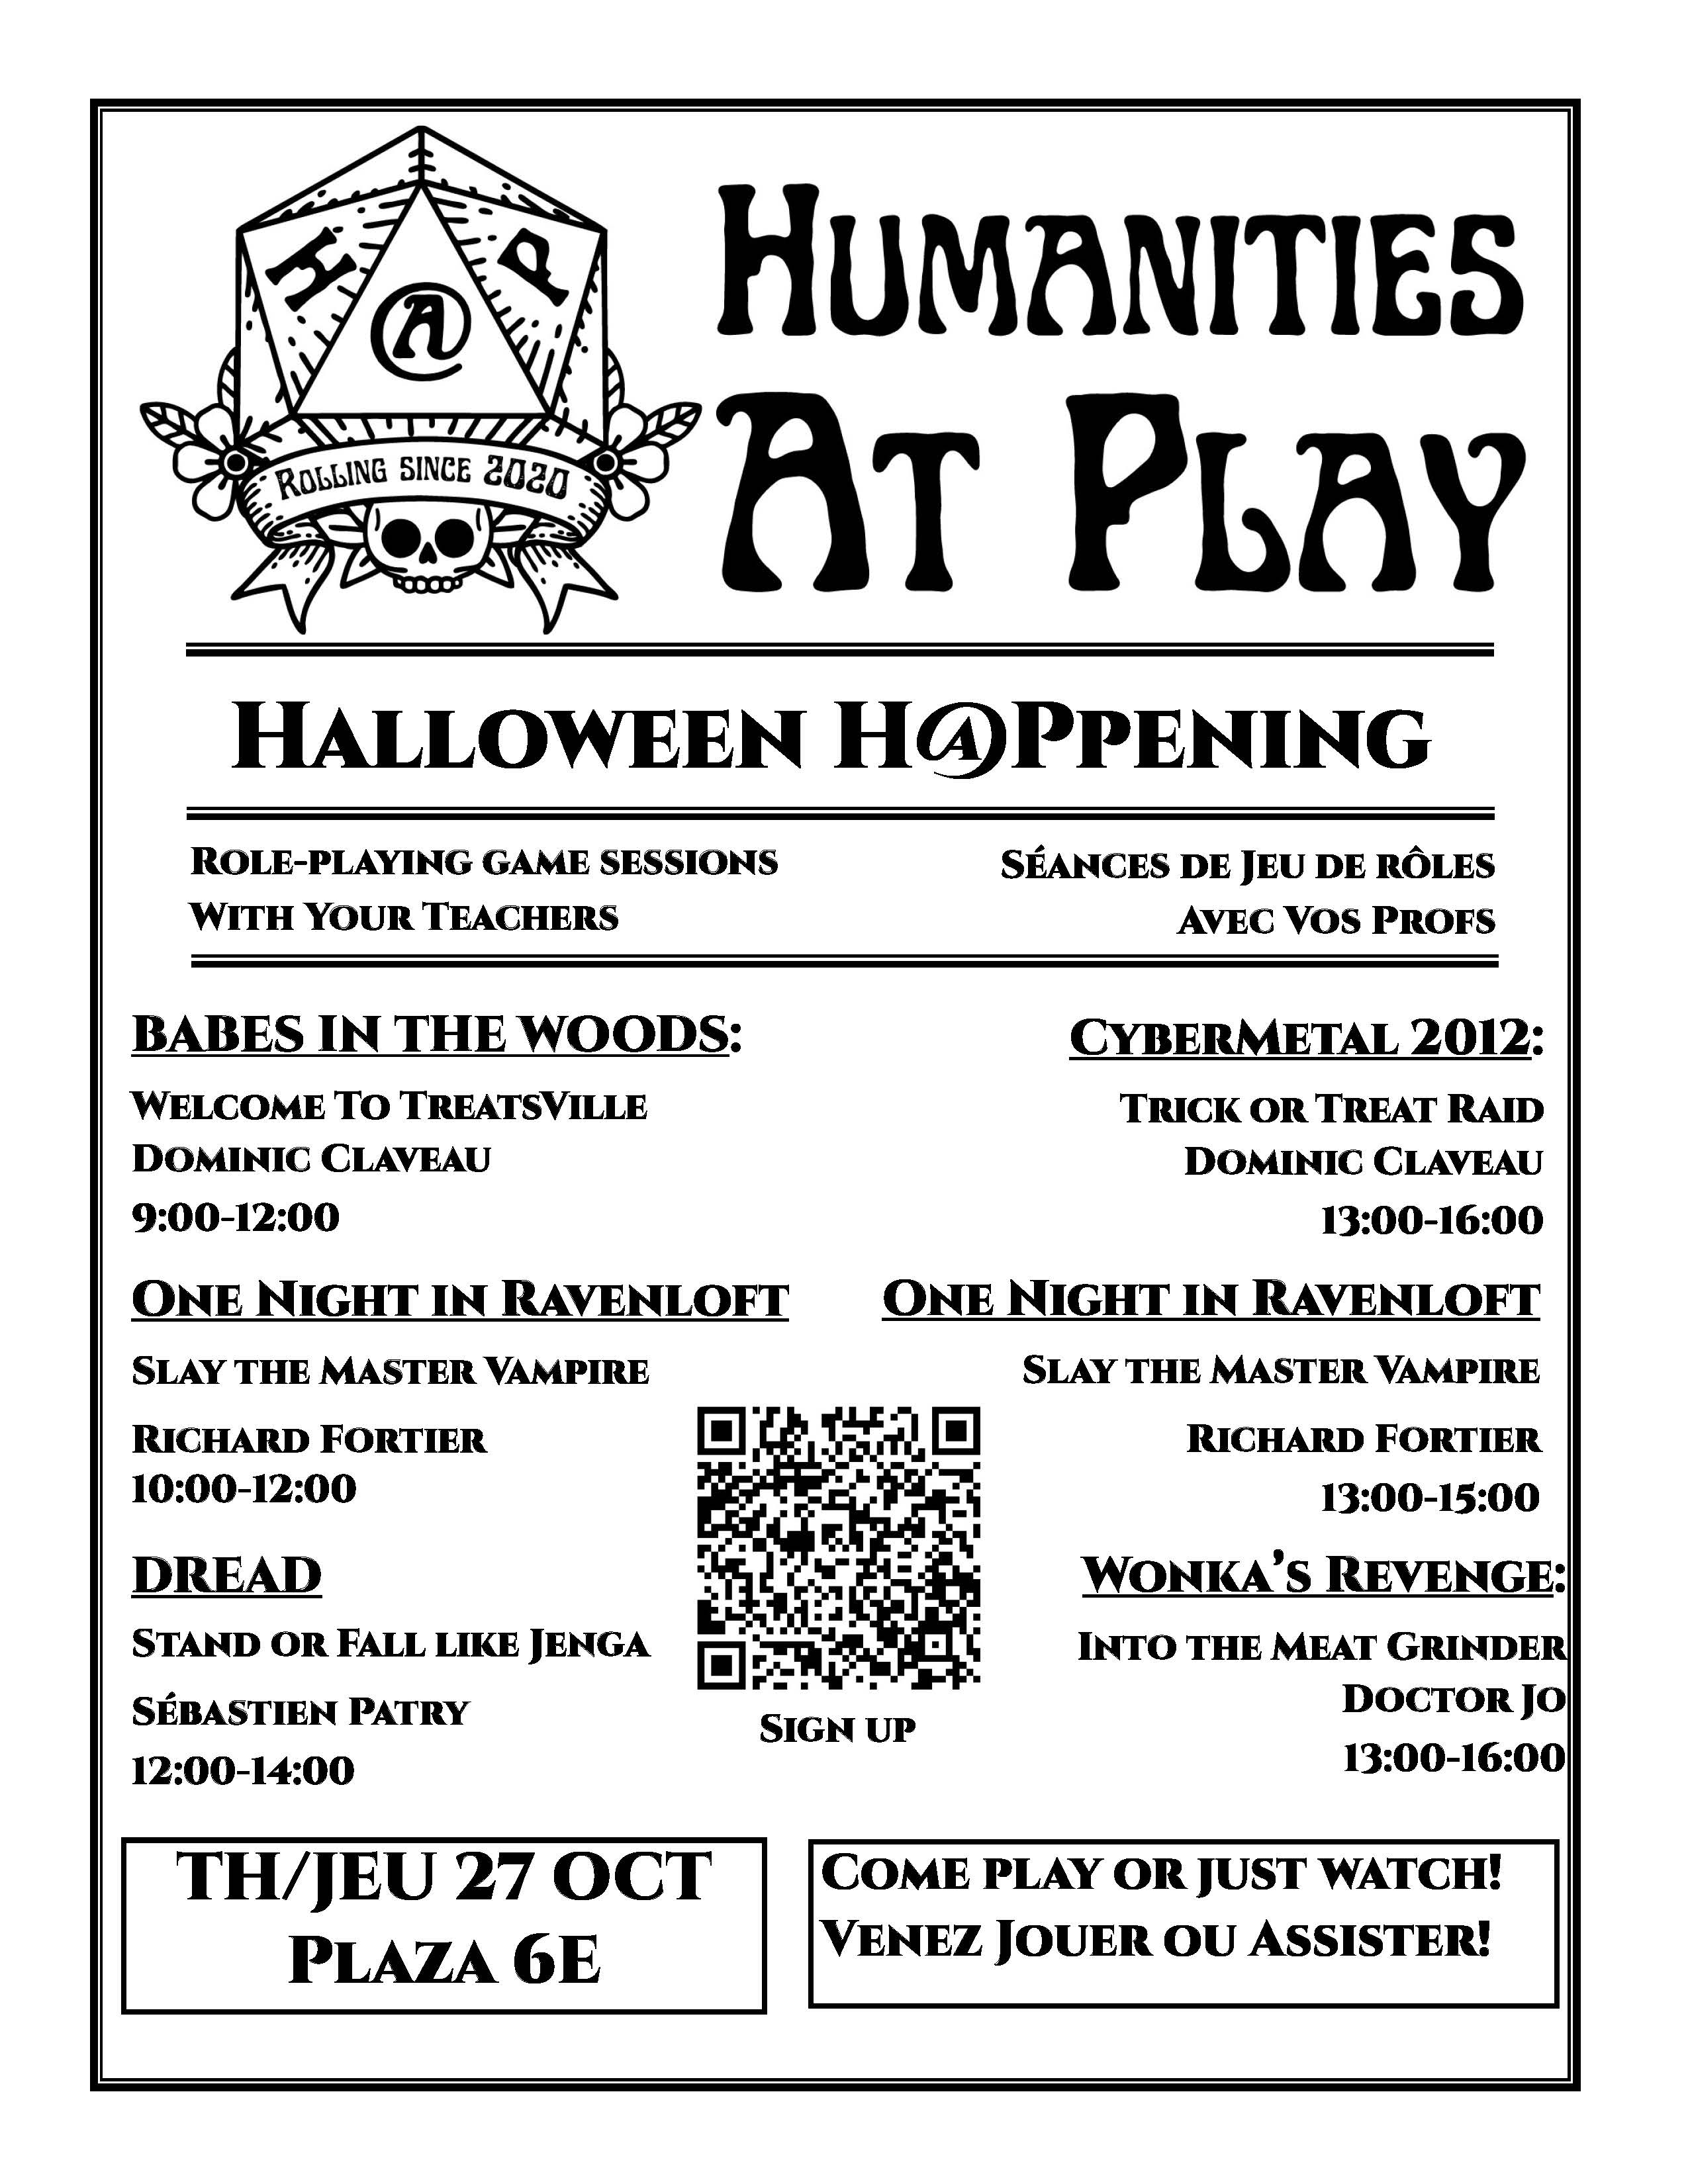 Schedule for Halloween event by the Humanities Department on October 27, featuring role-playing games and interactive sessions.

